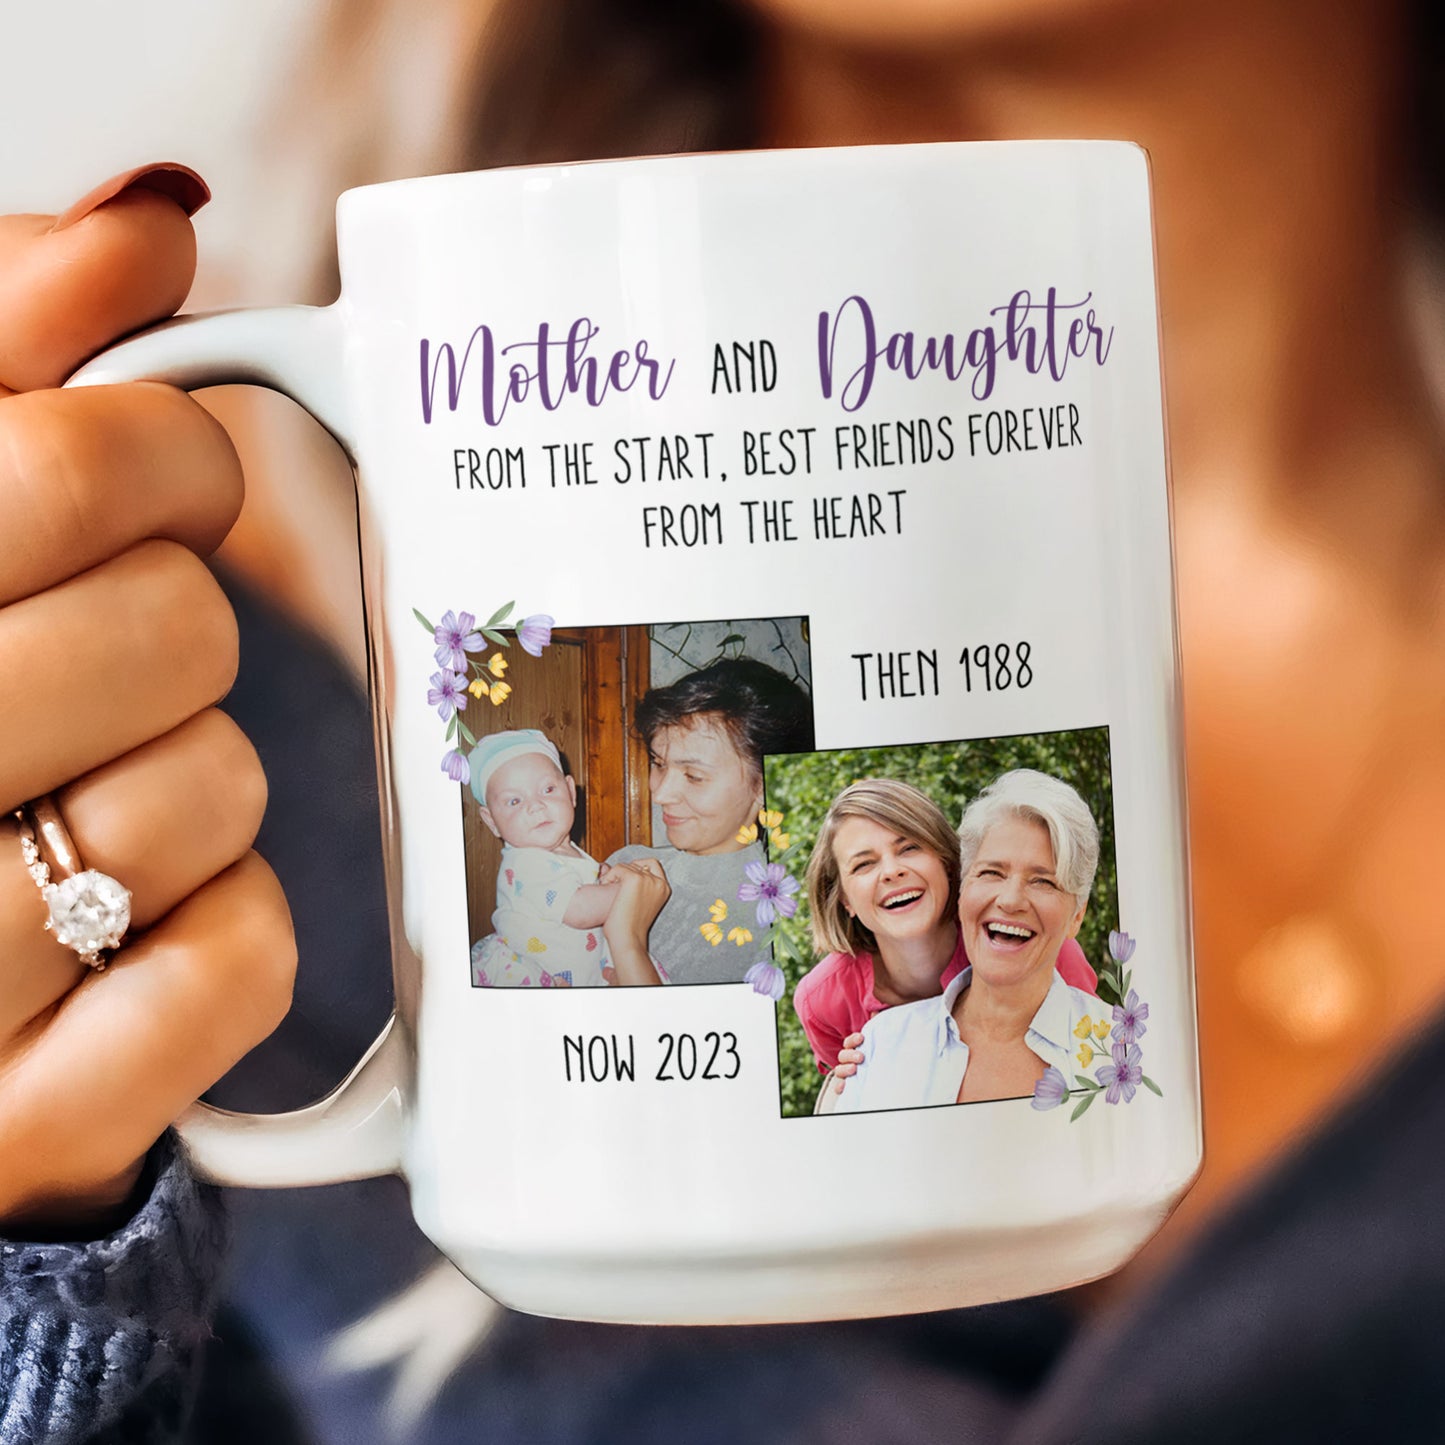 Mother And Daughter From The Start - Personalized Photo Mug